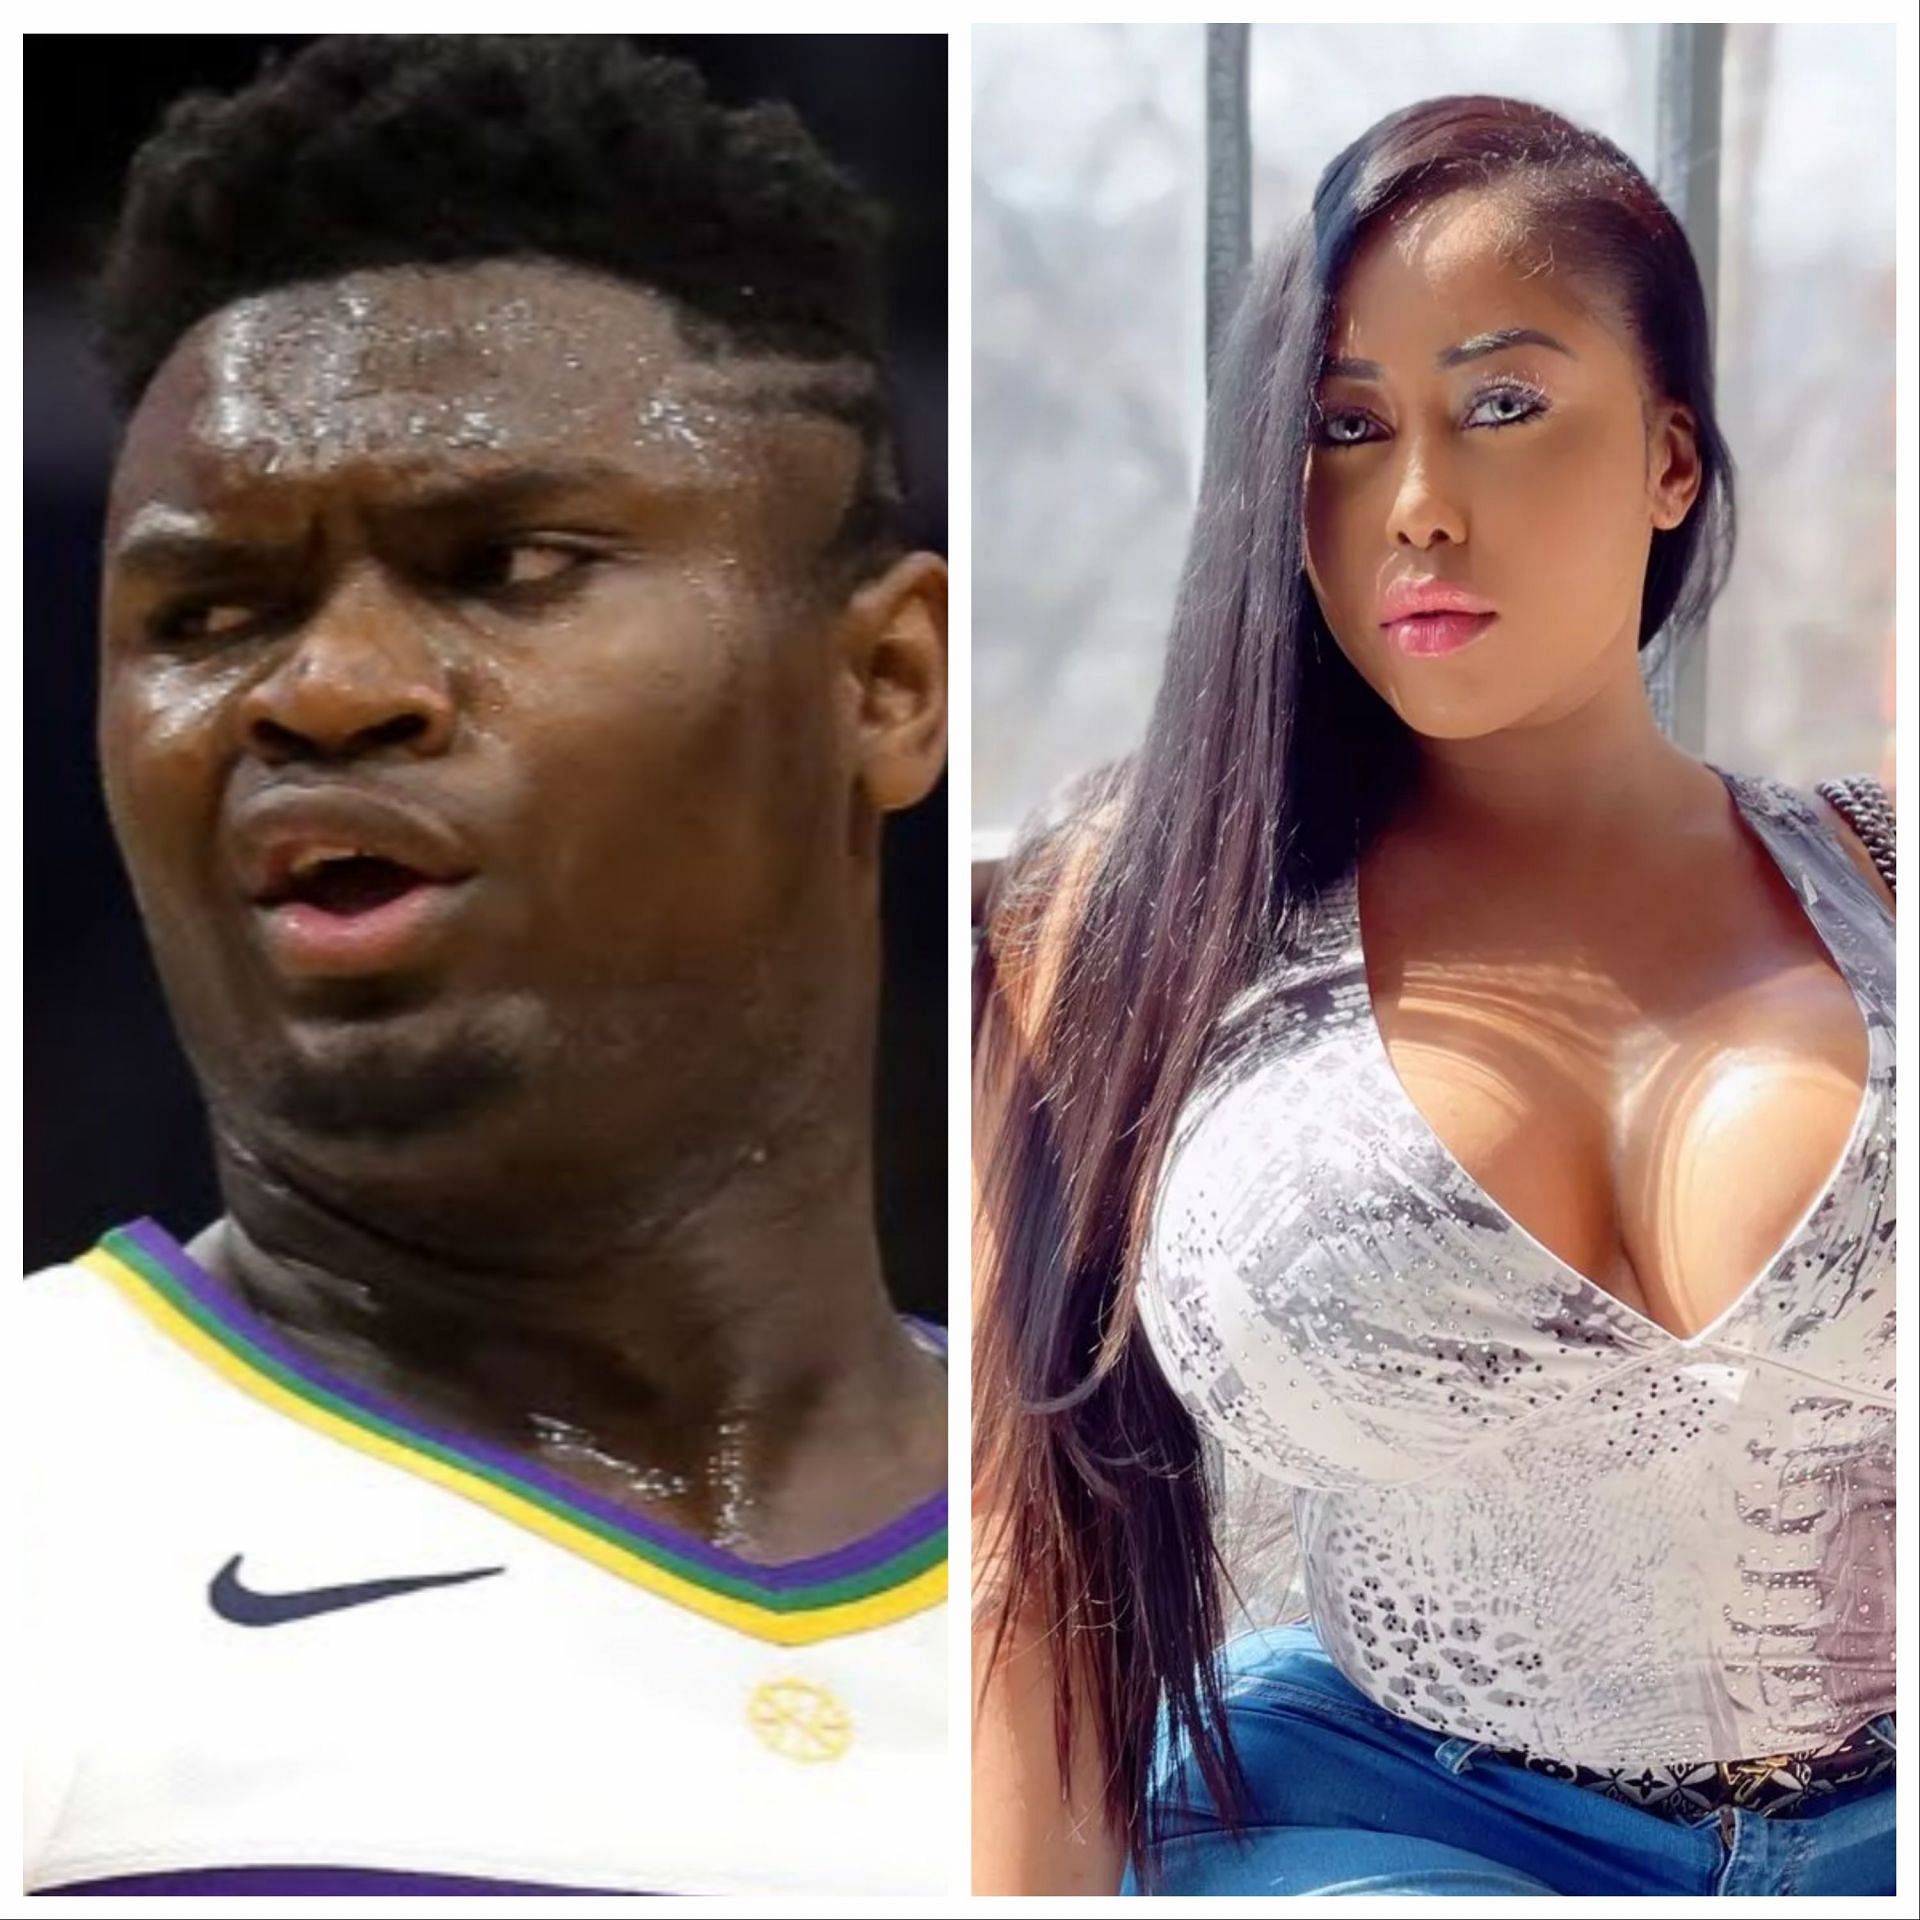 The Zion Williamson and Moriah Mills controversy continues to bubble away o...